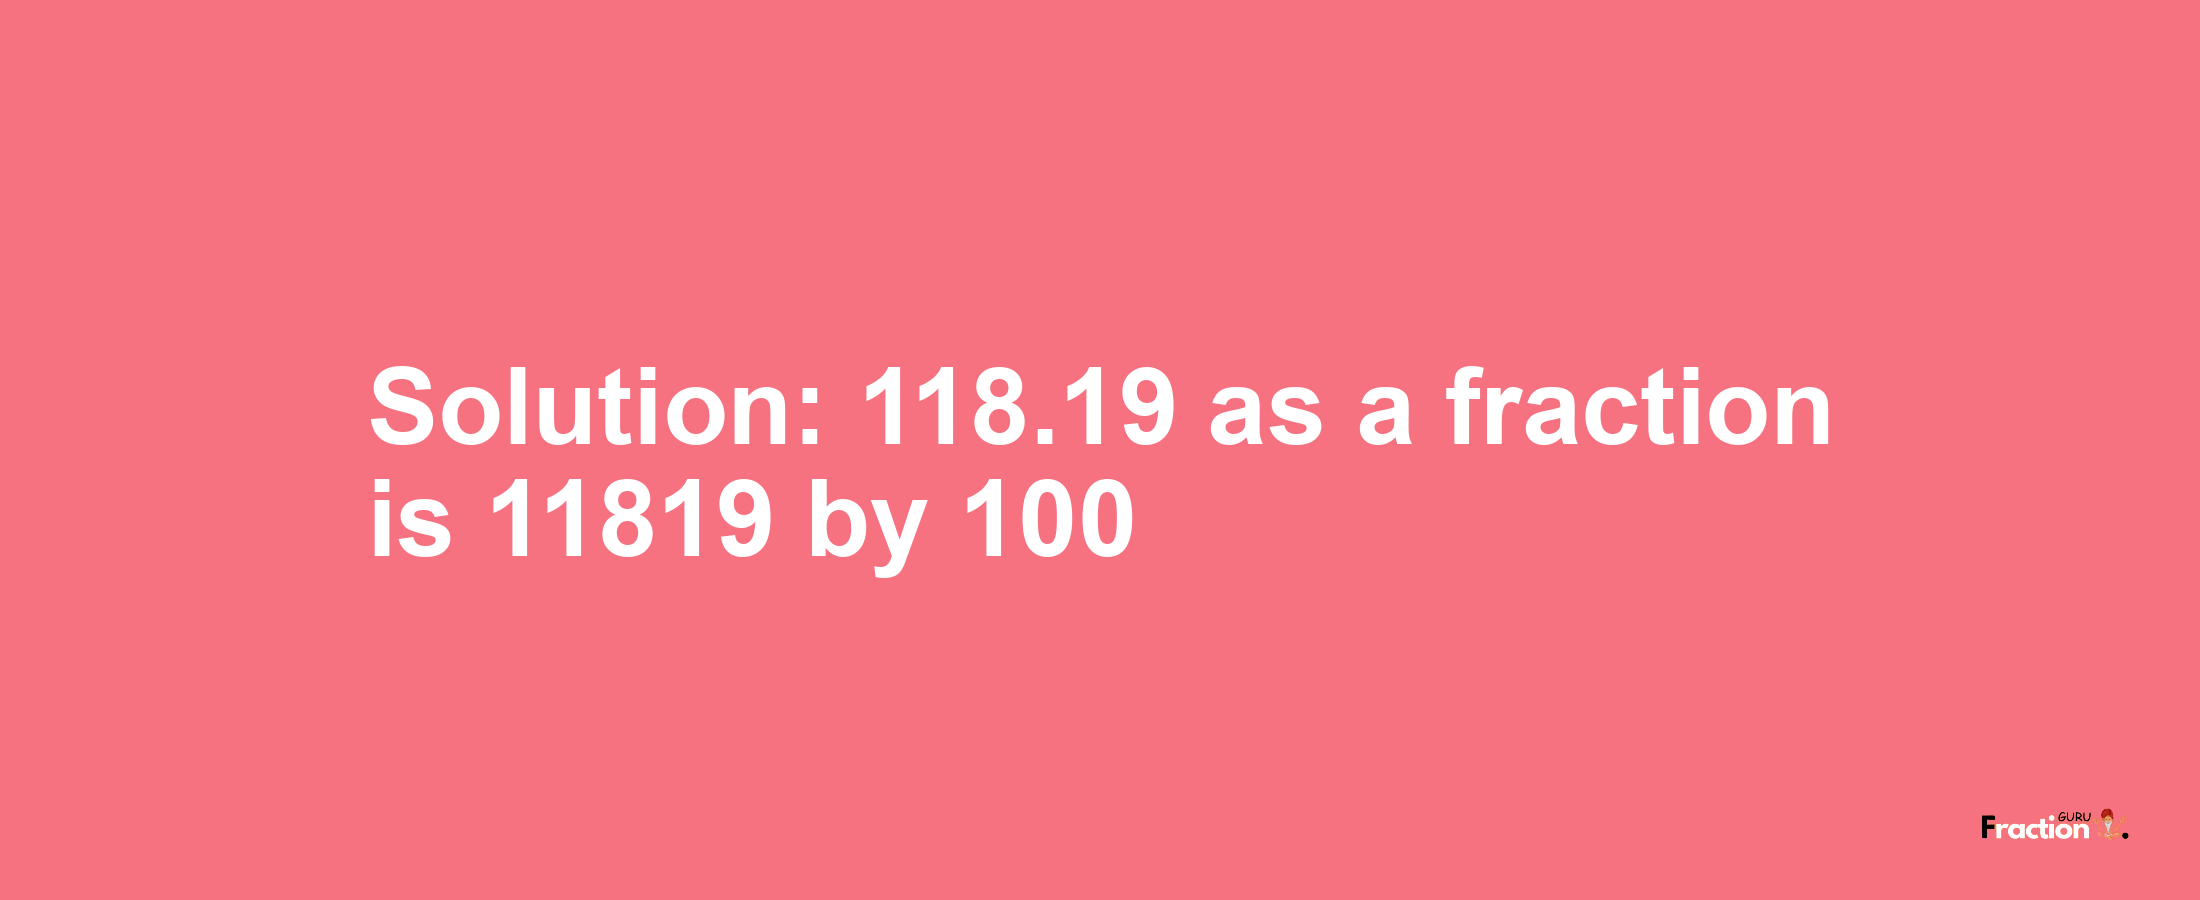 Solution:118.19 as a fraction is 11819/100